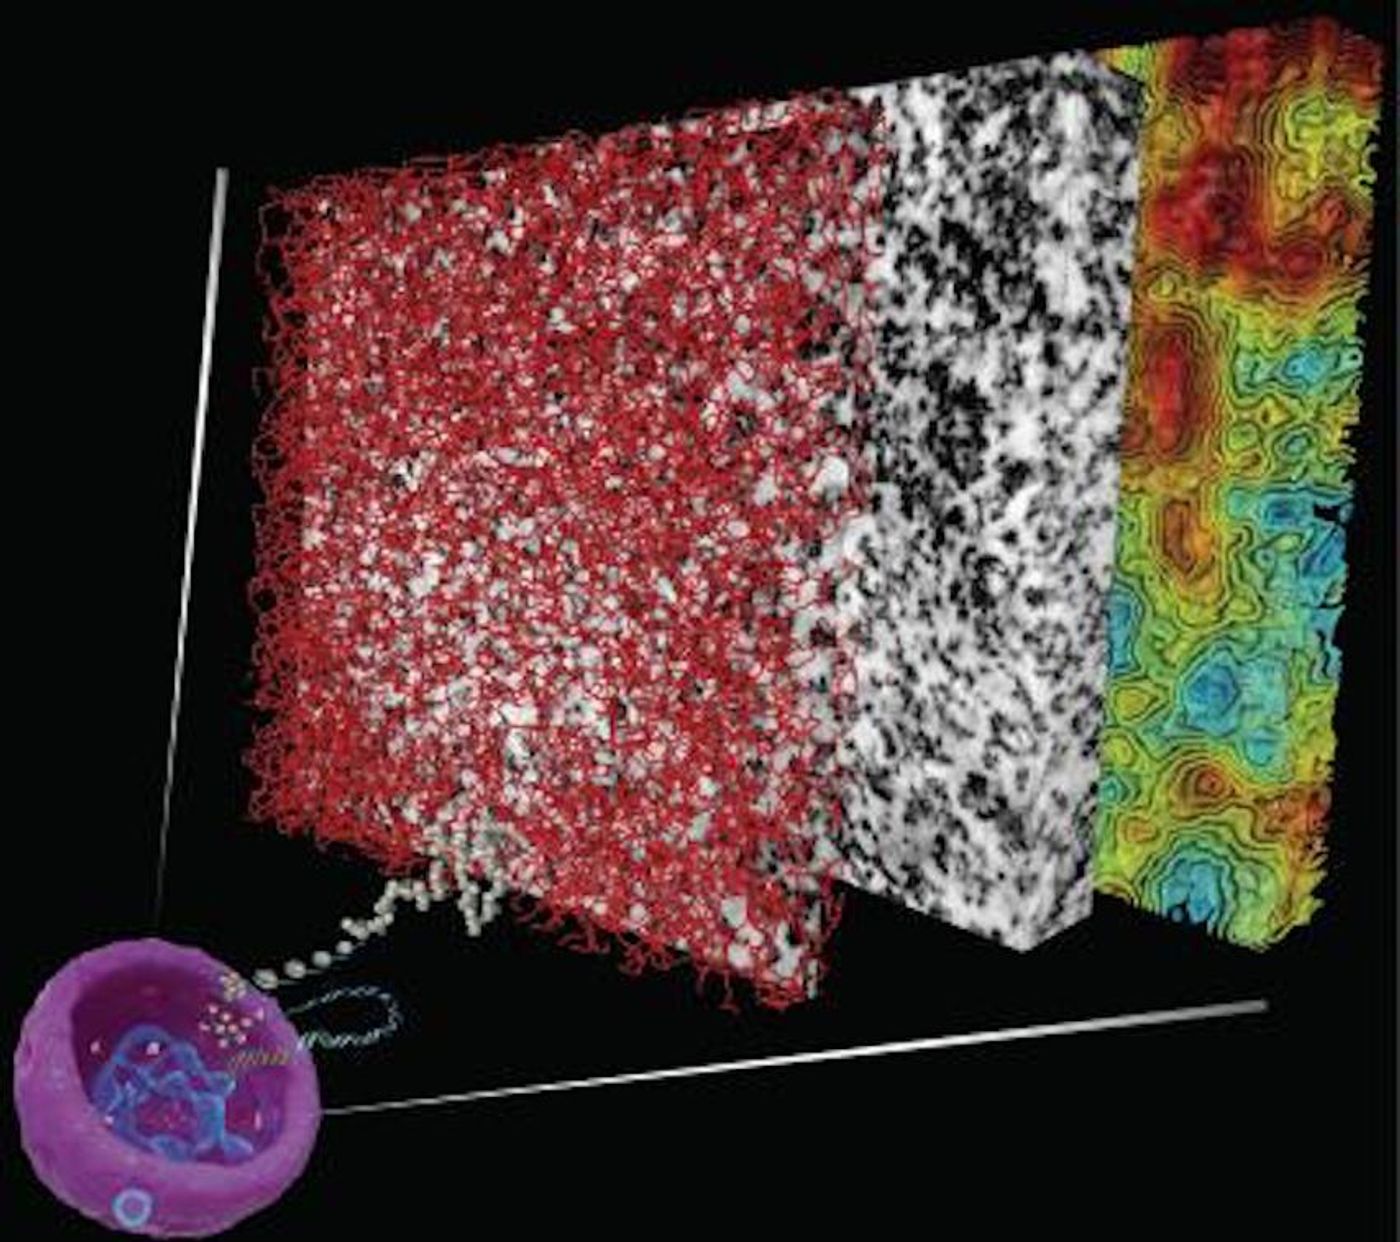 A new technique enables 3-D visualization of chromatin (DNA plus associated proteins) structure and organization within a cell nucleus (purple, bottom left) by painting the chromatin with a metal cast and imaging it with electron microscopy (EM). The middle block shows the captured EM image data, the front block illustrates the chromatin organization from the EM data, and the rear block shows the contour lines of chromatin density from sparse (cyan and green) to dense (orange and red). / Credit: Salk Institute